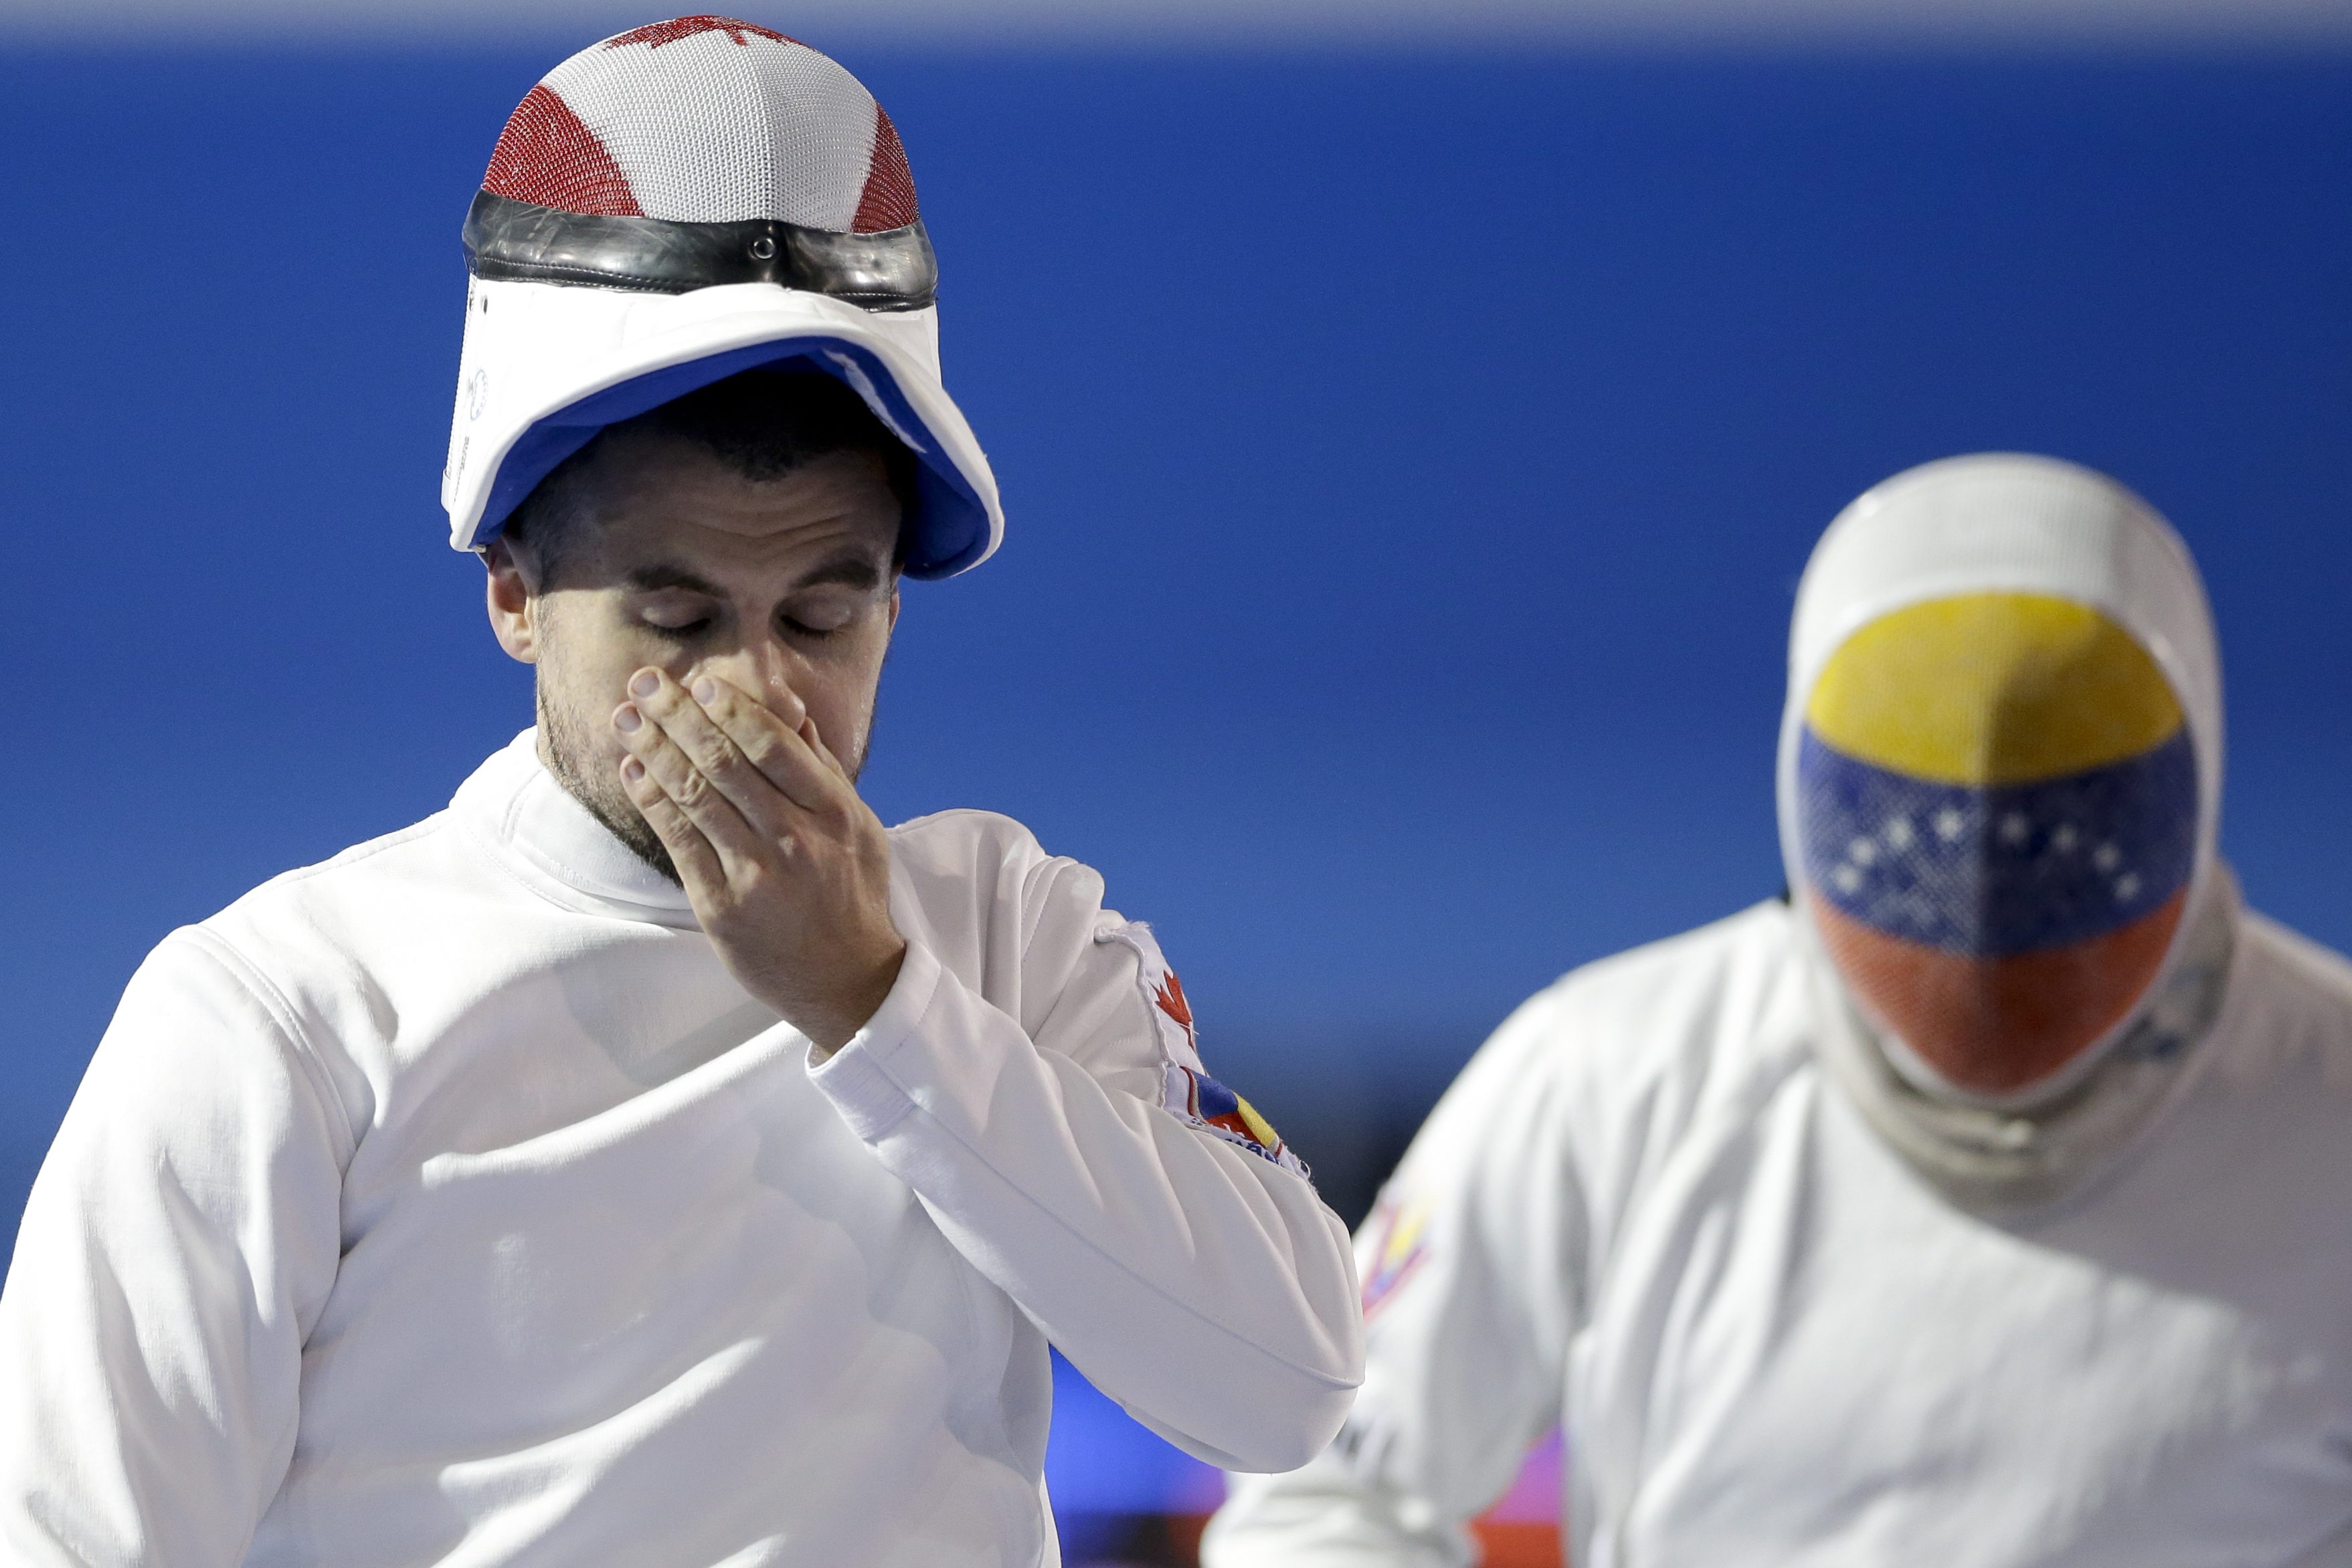 Canada's Maxime Brinck-Croteau, left, reacts during his epee bout against Venezuela's Ruben Limardo, right, in fencing competition in the Pan Am Games in Toronto Tuesday, July 21, 2015. Limardo won, 15-0. (AP Photo/Gregory Bull)